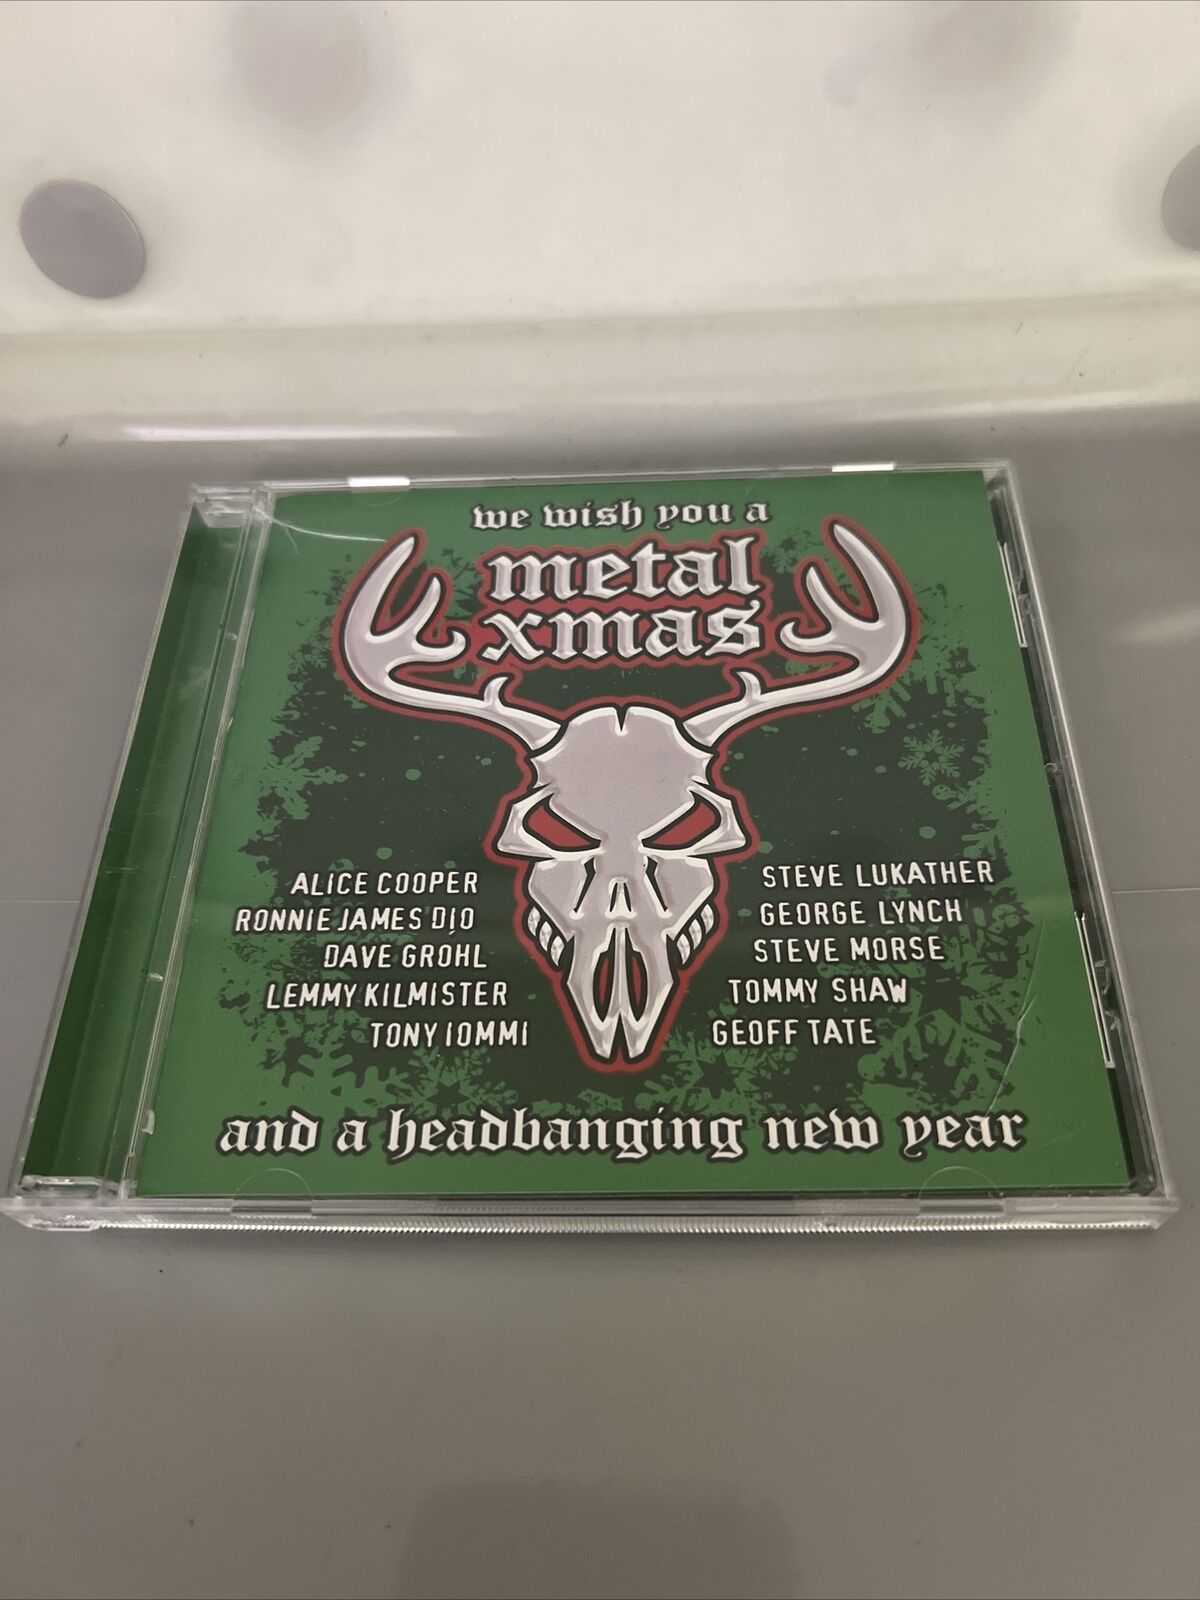 WE WISH YOU A METAL XMAS (DELUXE EDITION) CD cracks in case